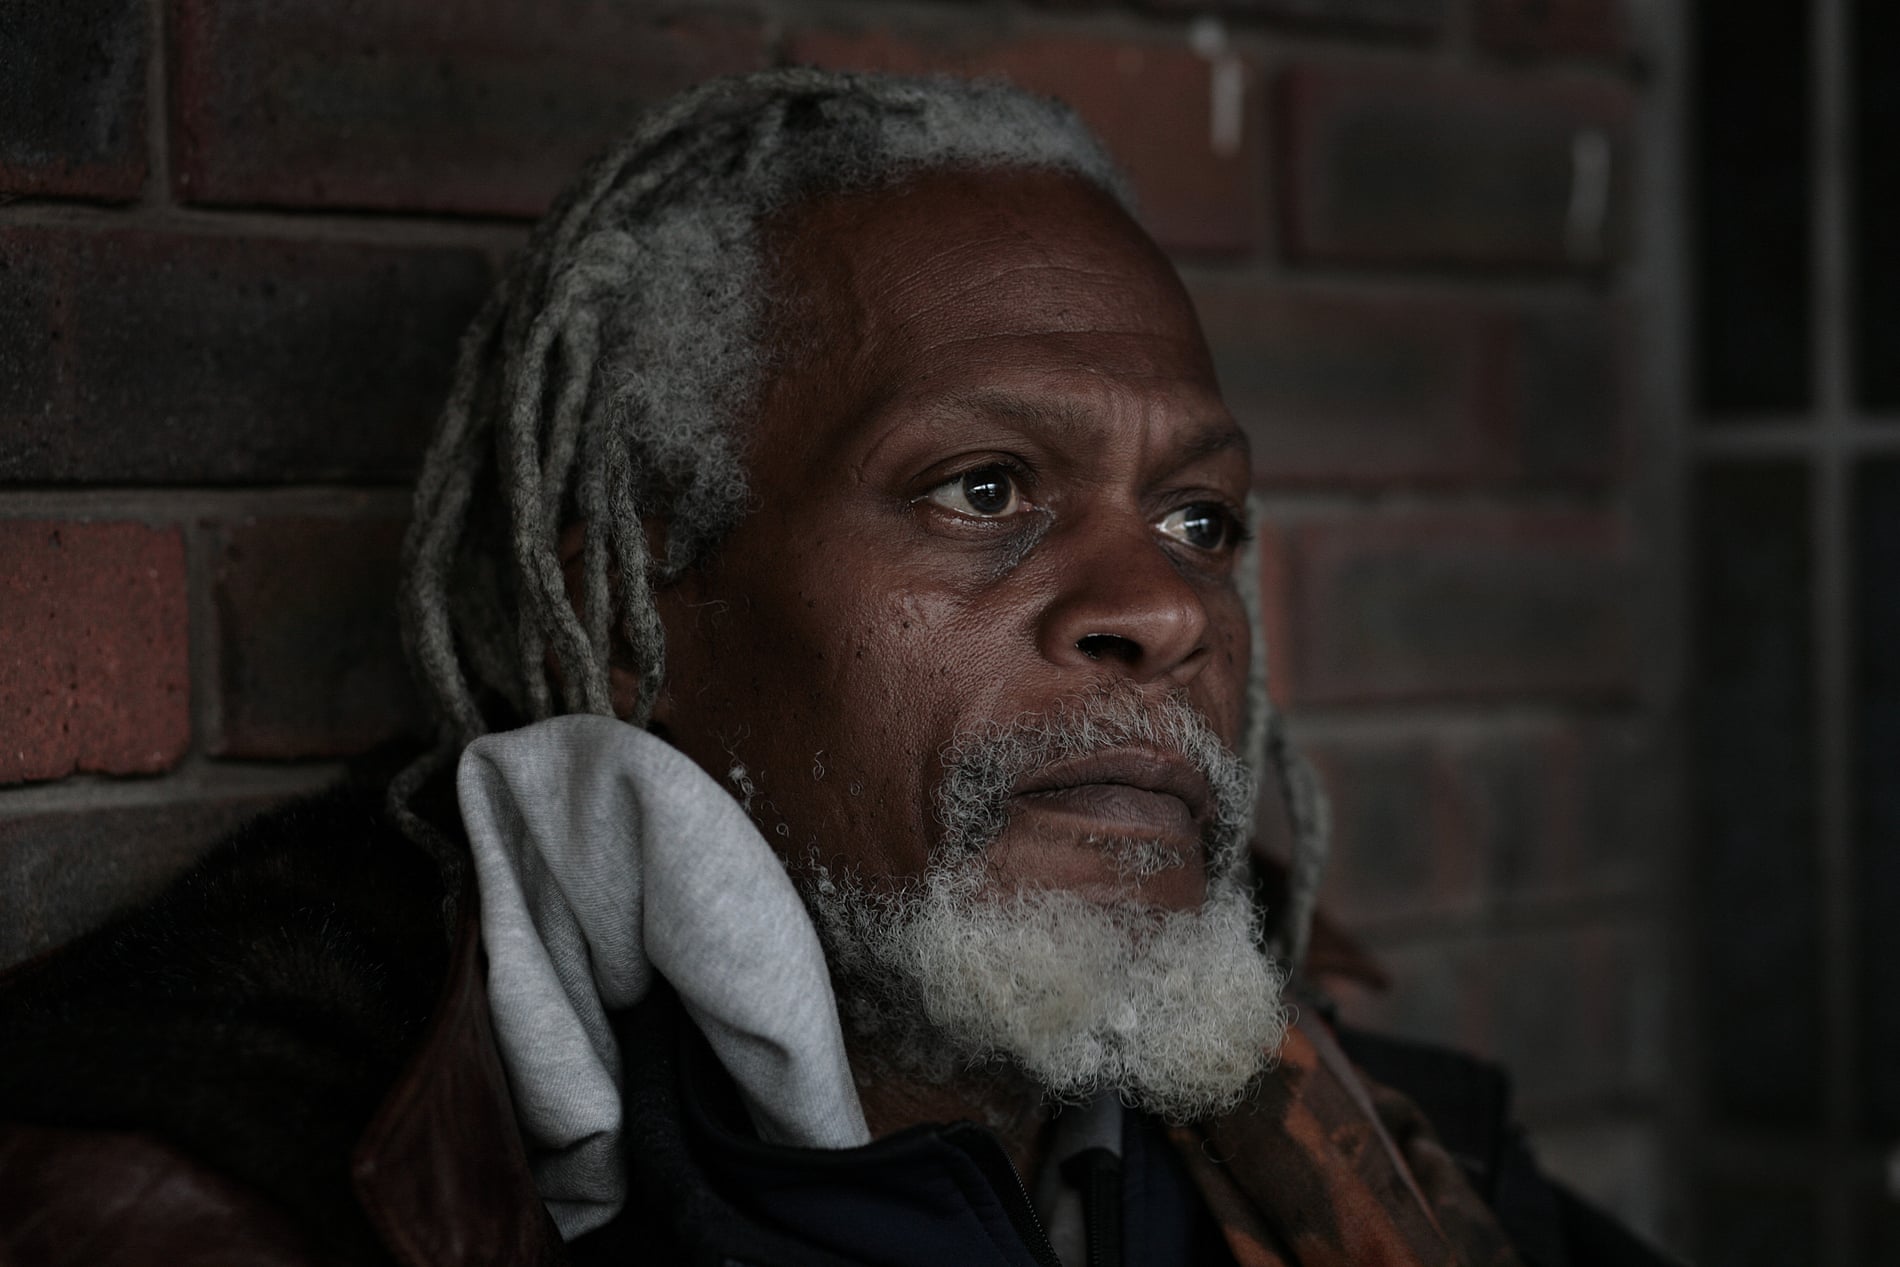 Stephen, who has been sleeping rough in Elephant and Castle